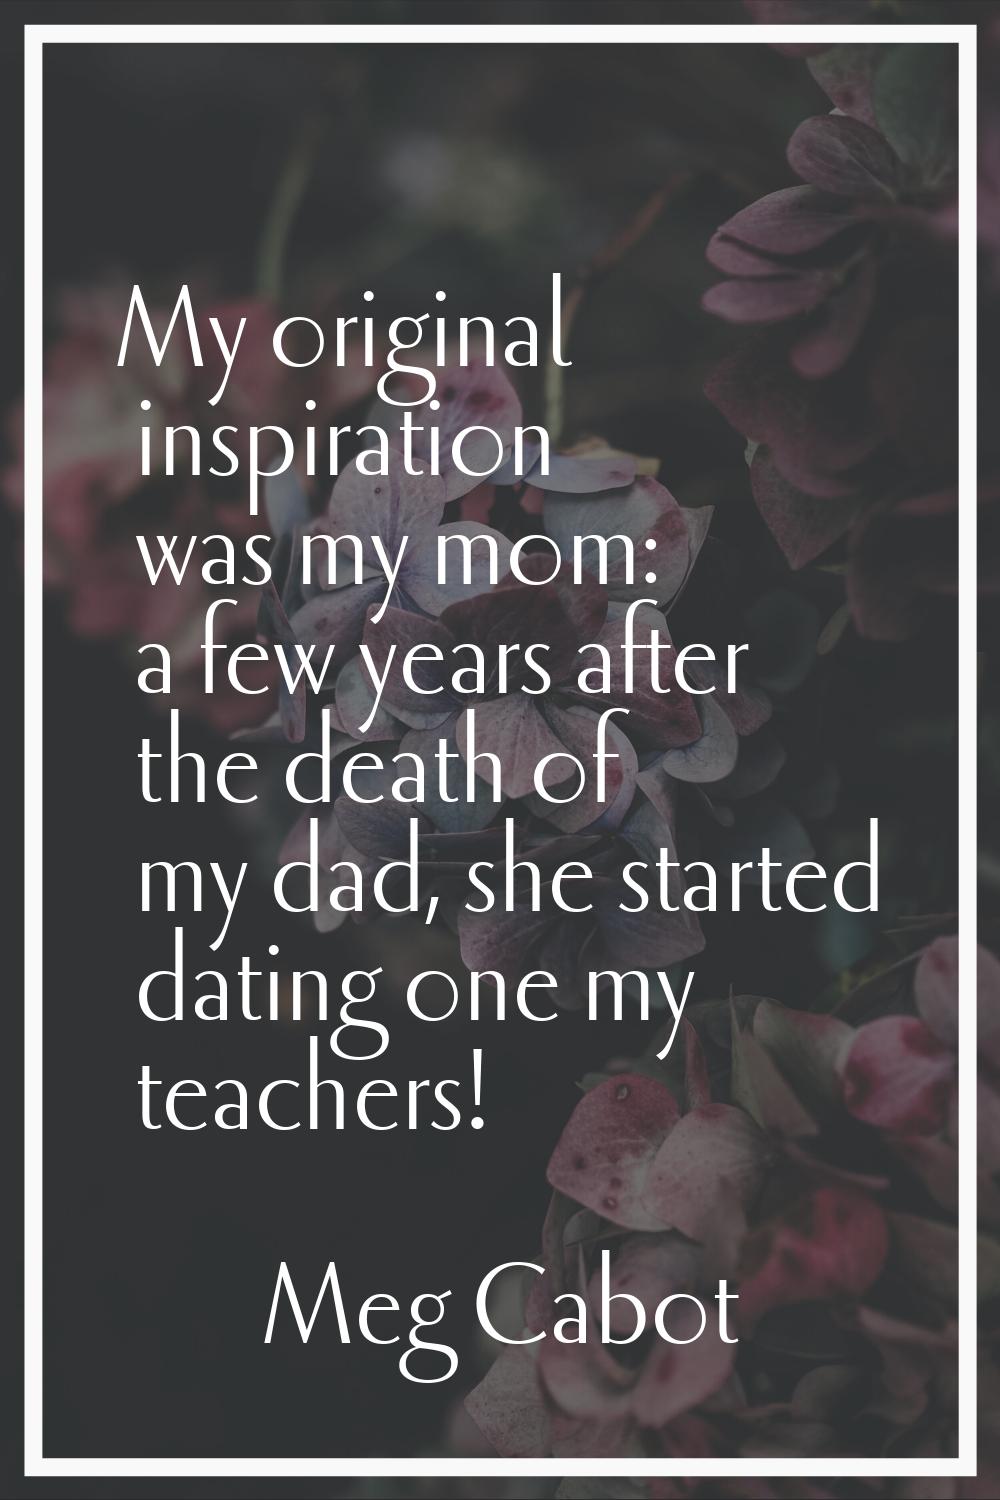 My original inspiration was my mom: a few years after the death of my dad, she started dating one m